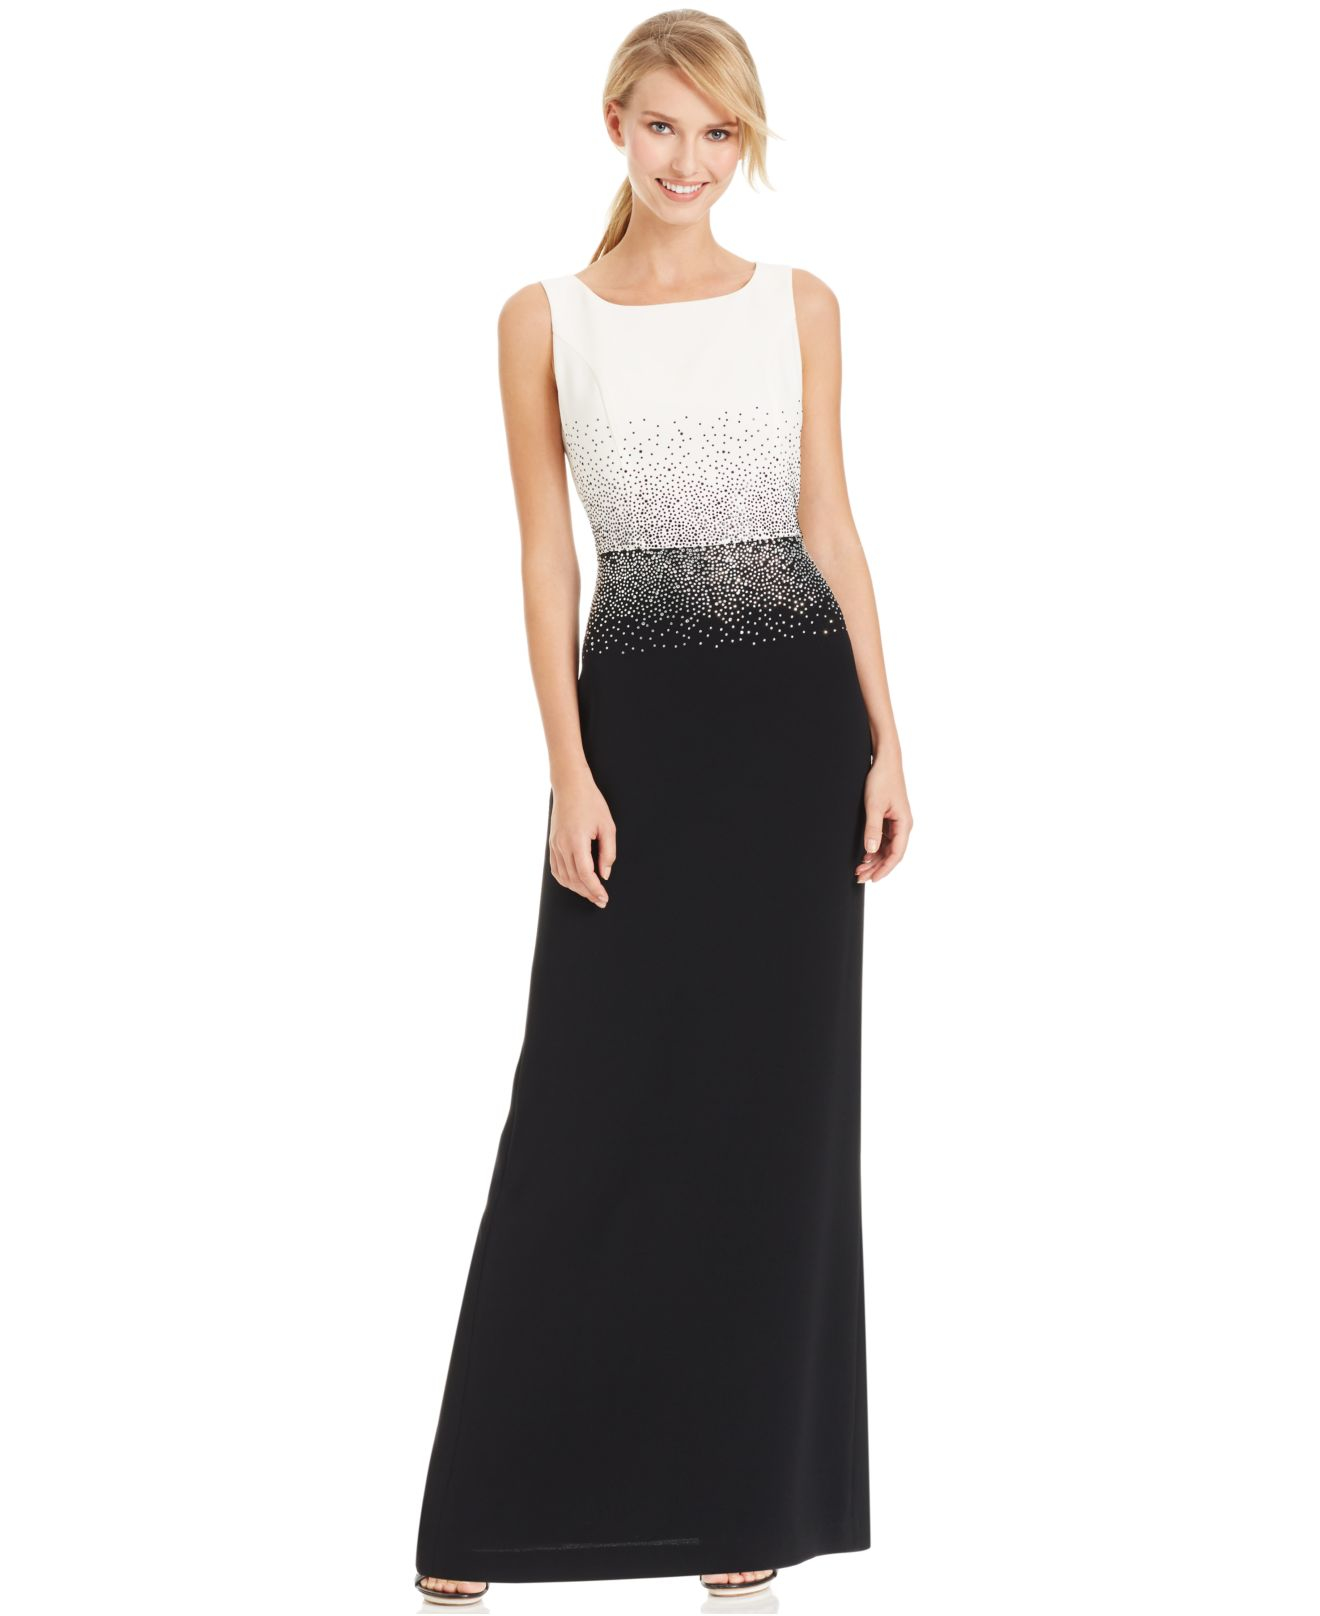 calvin klein black studded colorblocked evening dress product 0 909350797 normal